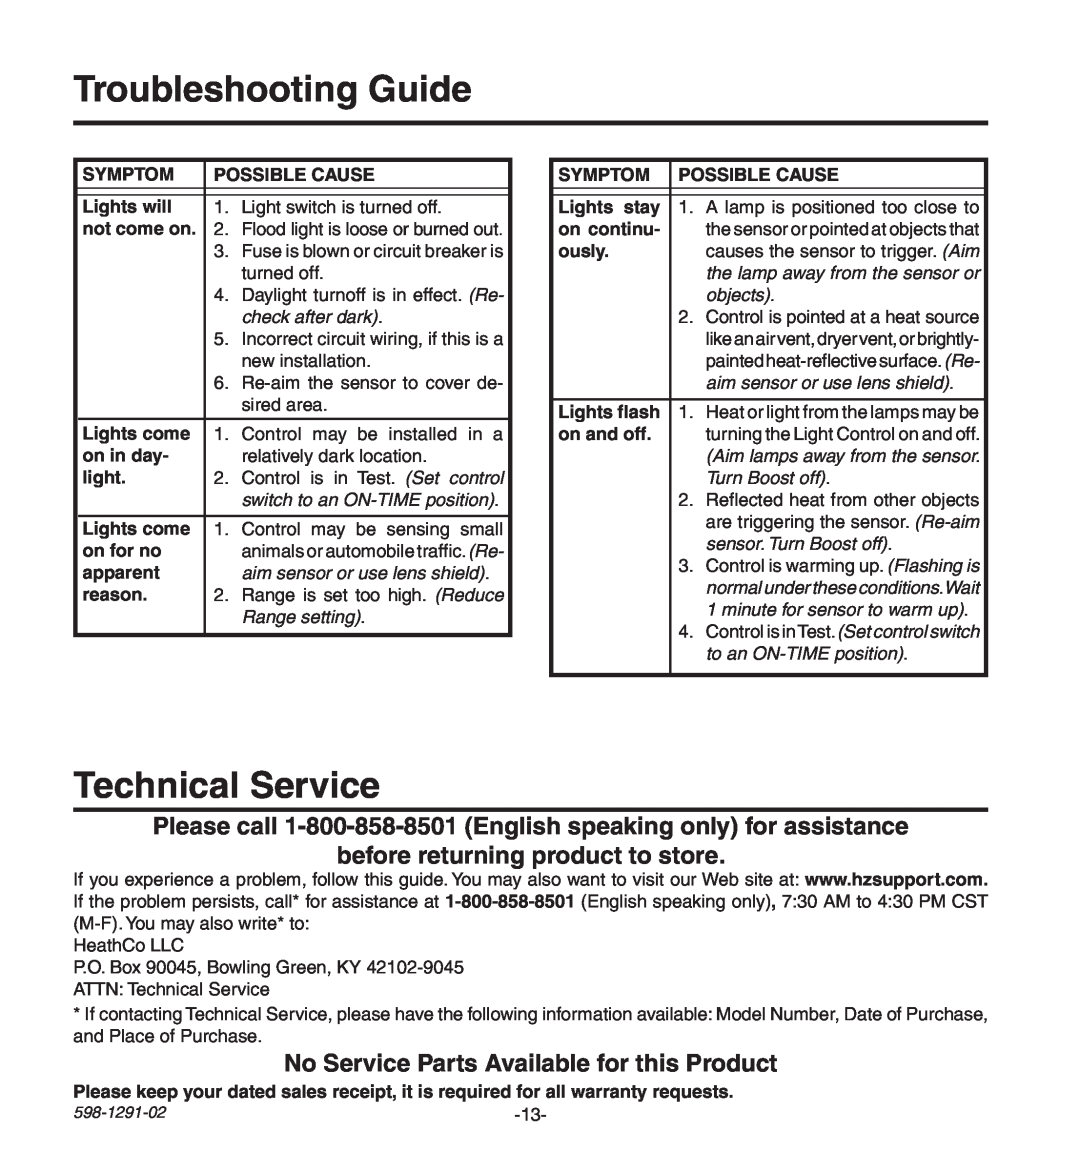 Heath Zenith UT-9260-BZ Troubleshooting Guide, Technical Service, Symptom, Possible Cause, Lights will, not come on, light 